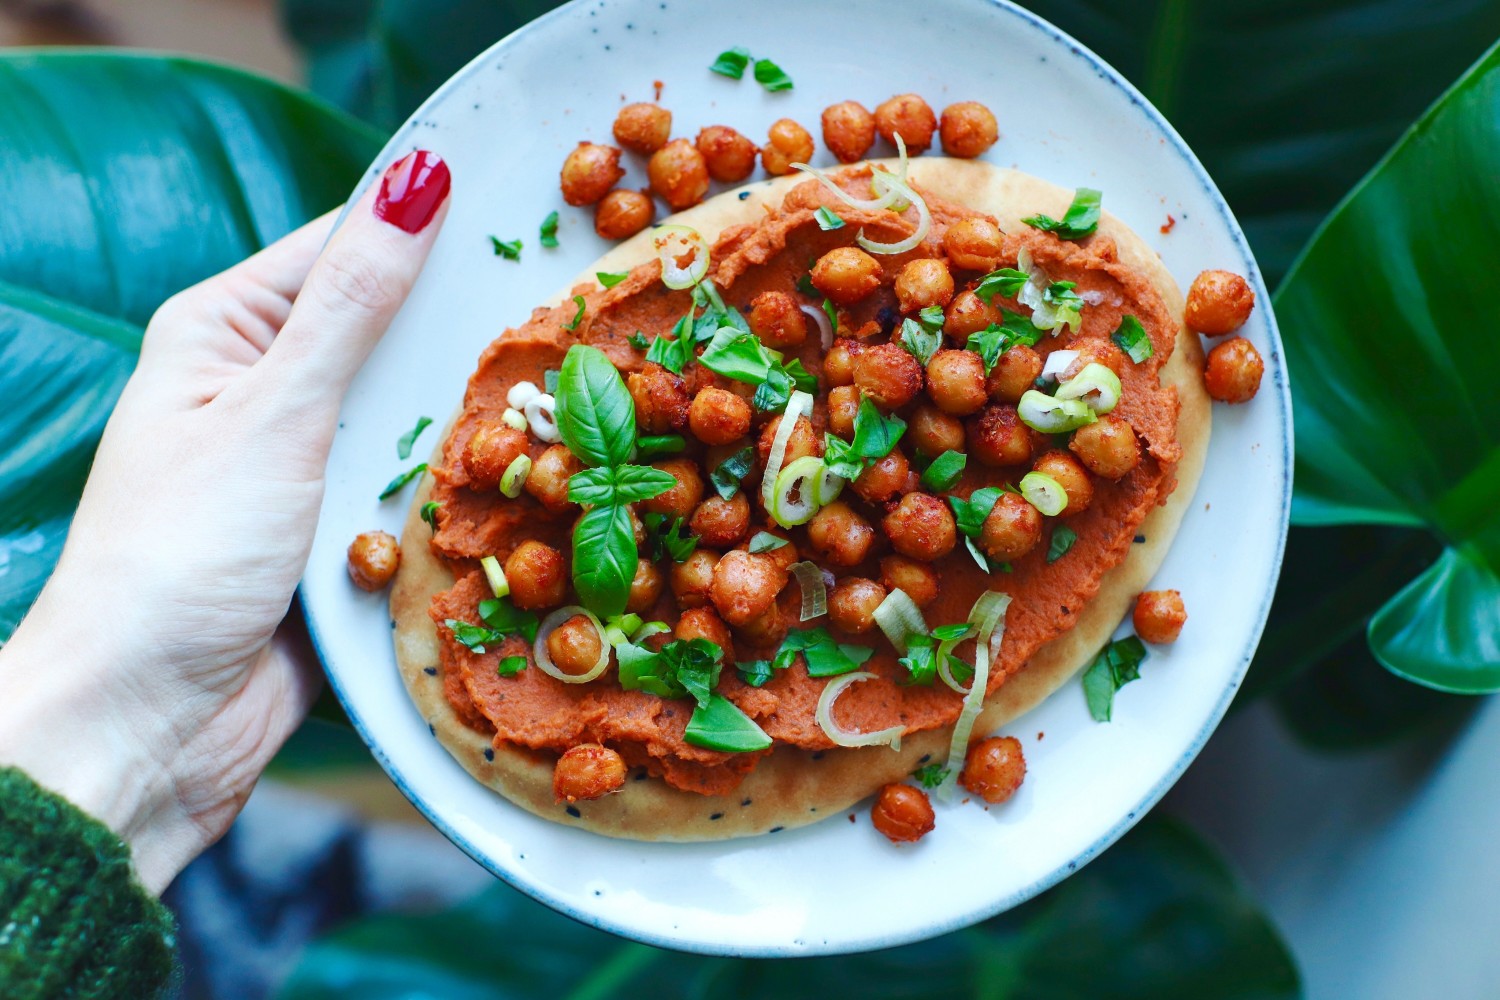 Naan bread with sun-dried tomato butterbean hummus &amp; spicy crispy chickpeas